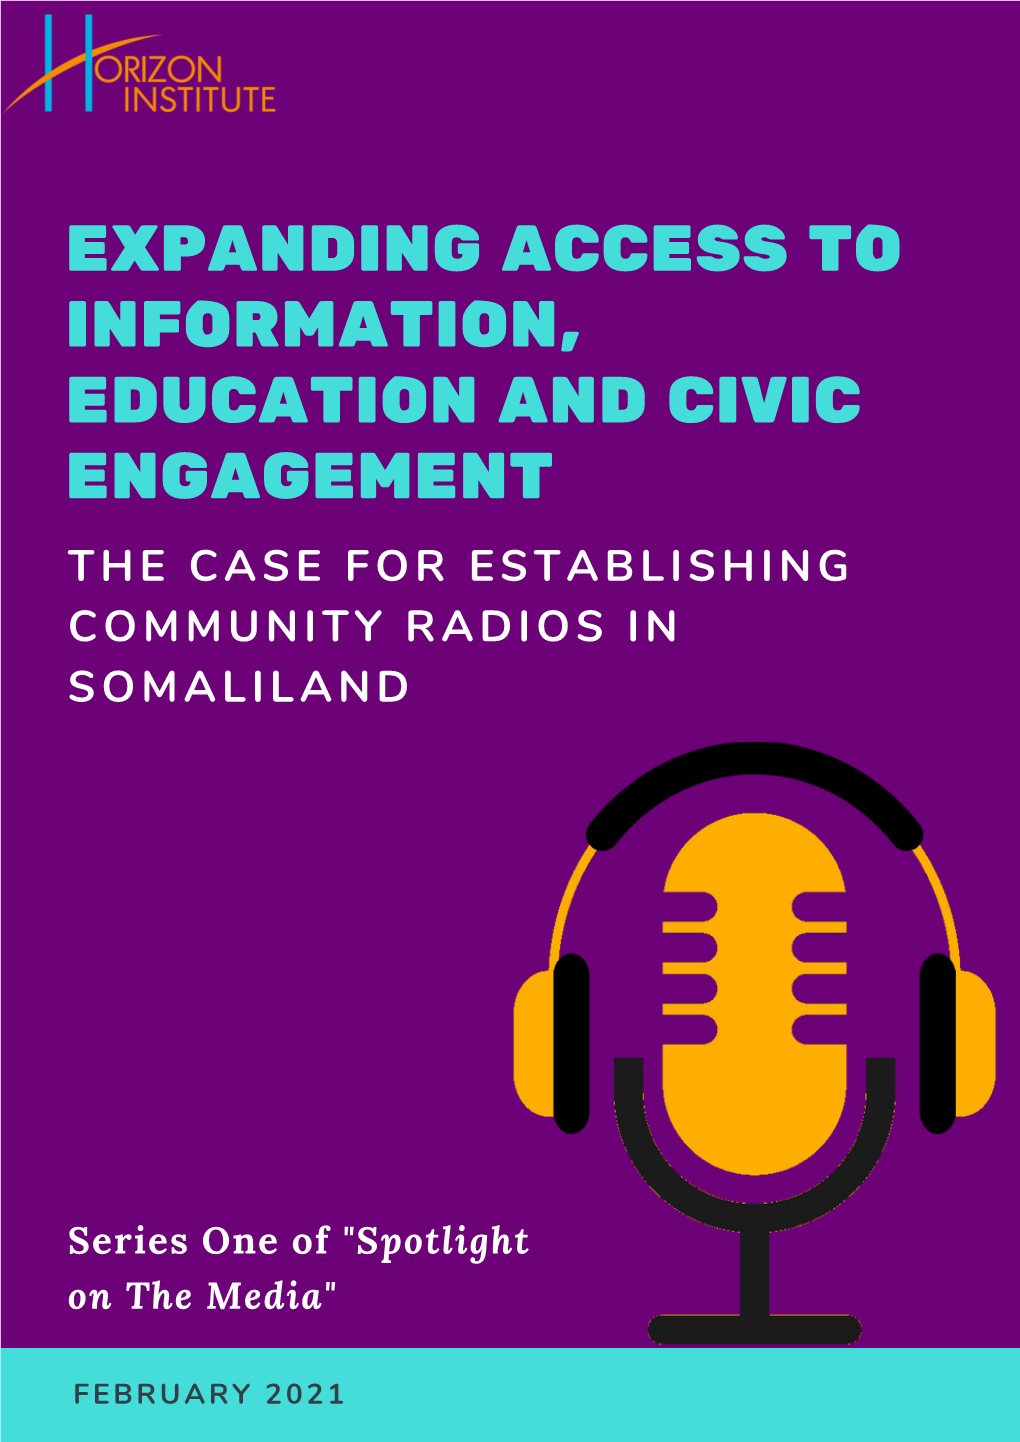 Expanding Access to Information, Education and Civic Engagement the Case for Establishing Community Radios in Somaliland